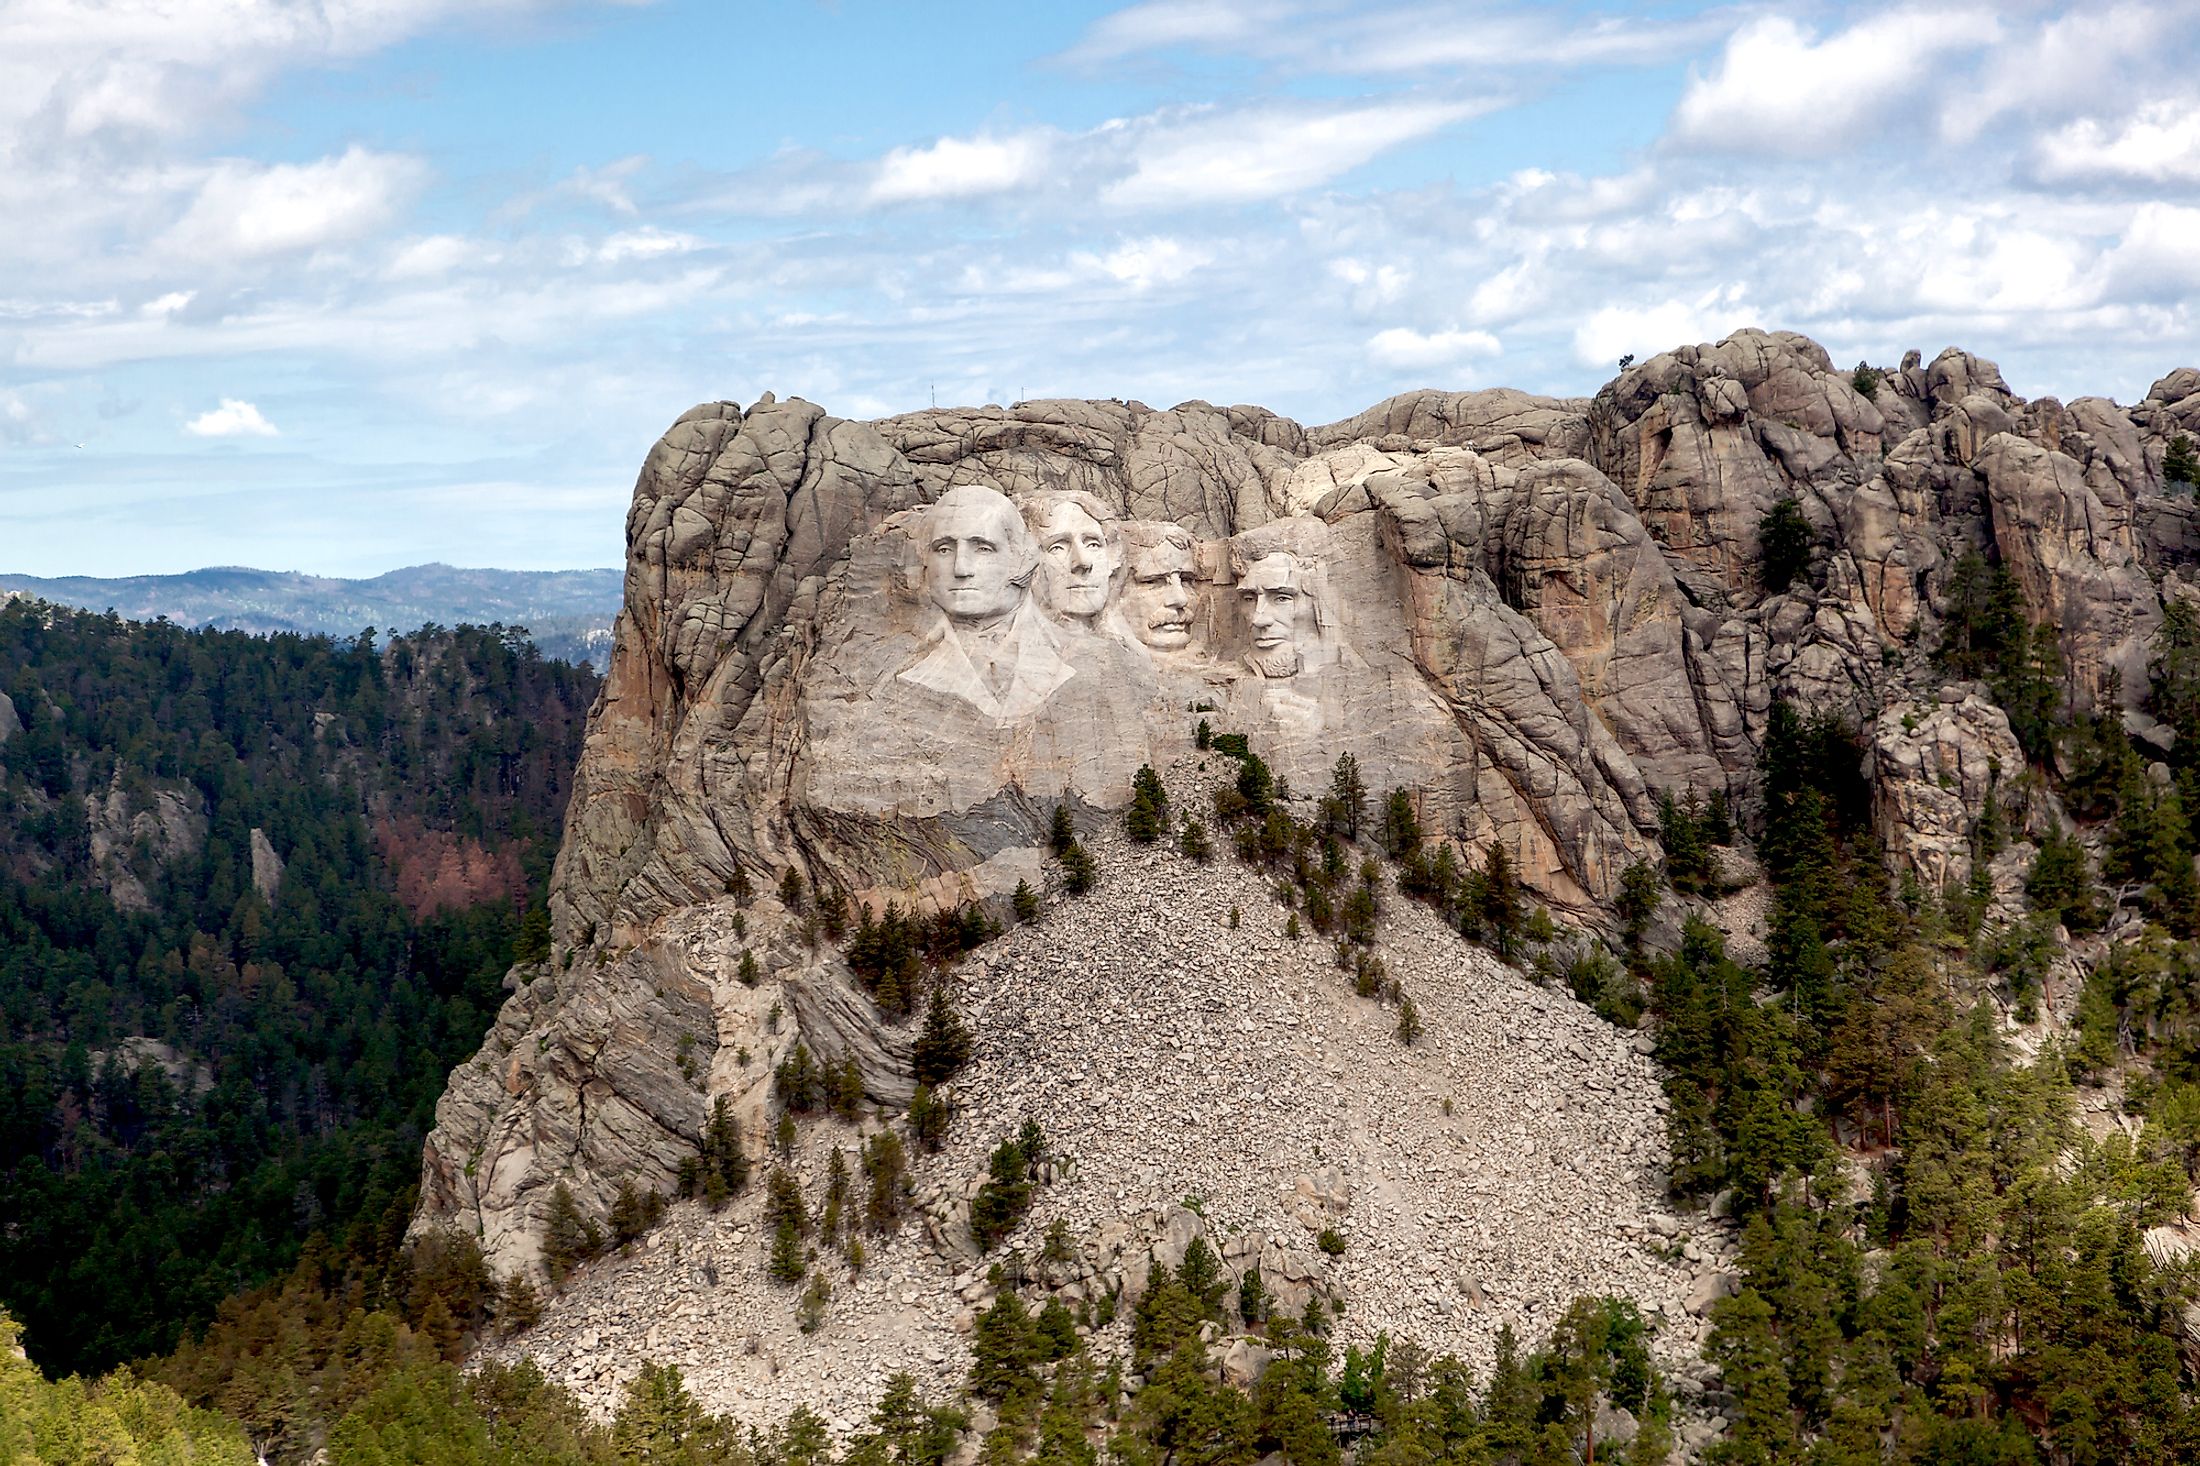 An aerial view of Mount Rushmore Narional Memorial showing the carved faces of past Presidents George Washington, Thomas Jefferson, Theodore Roosevelt, and Abraham Lincoln.